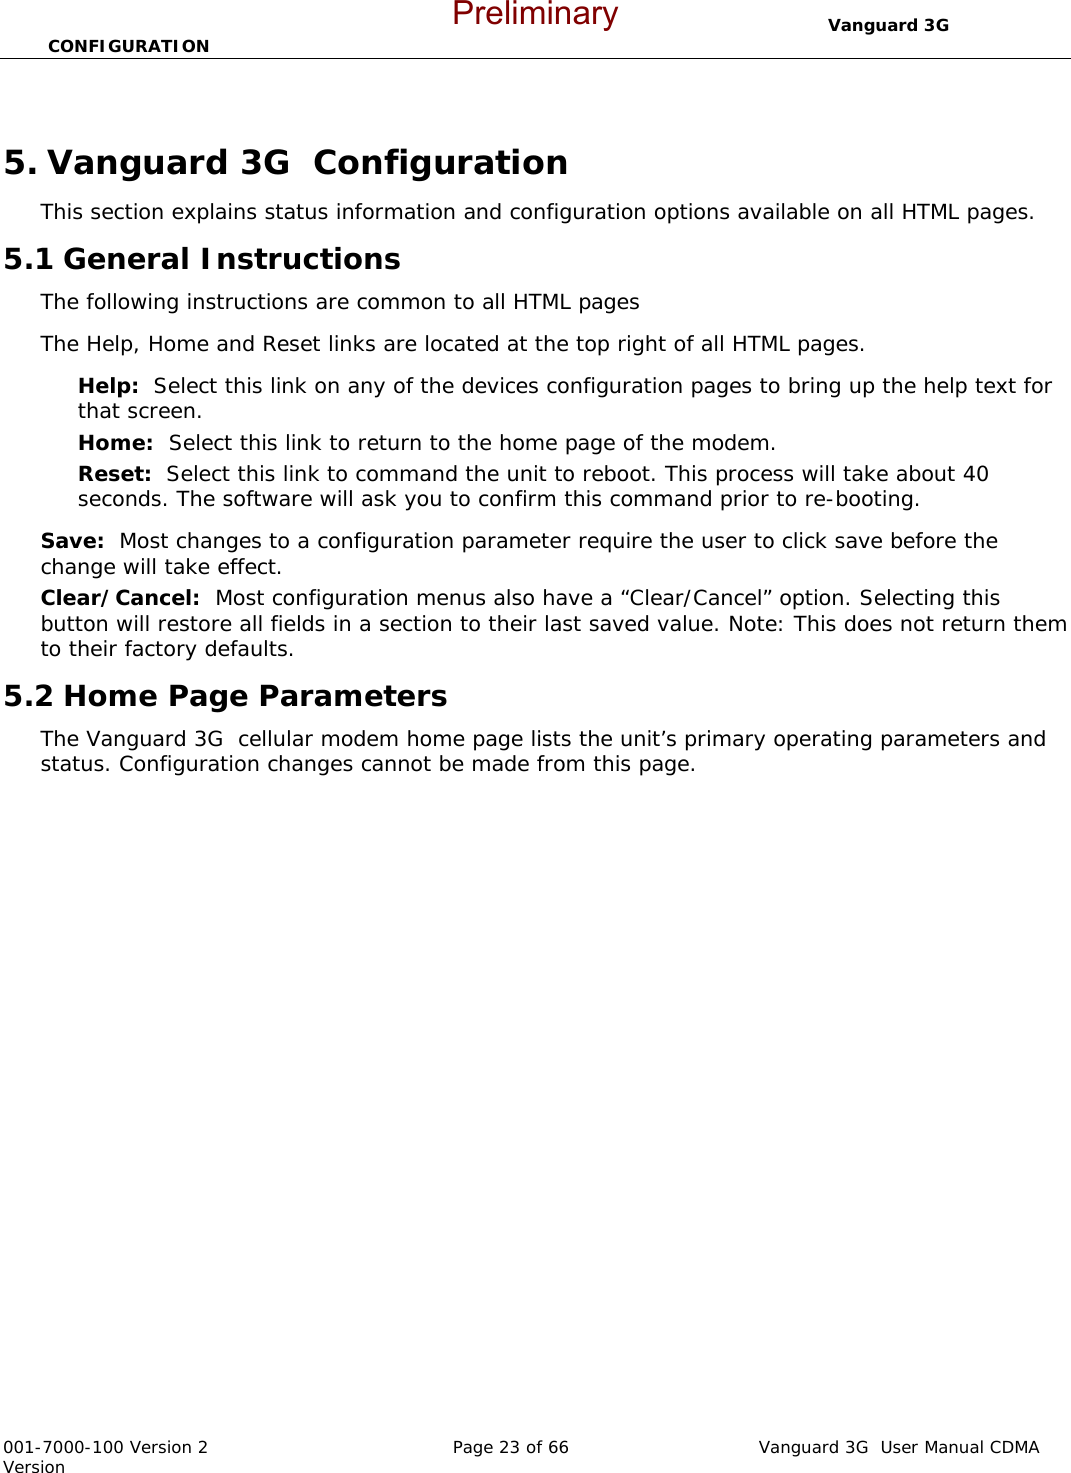                                  Vanguard 3G  CONFIGURATION  001-7000-100 Version 2       Page 23 of 66       Vanguard 3G  User Manual CDMA Version  5. Vanguard 3G  Configuration This section explains status information and configuration options available on all HTML pages.   5.1 General Instructions The following instructions are common to all HTML pages The Help, Home and Reset links are located at the top right of all HTML pages.   Help:  Select this link on any of the devices configuration pages to bring up the help text for that screen.   Home:  Select this link to return to the home page of the modem.   Reset:  Select this link to command the unit to reboot. This process will take about 40 seconds. The software will ask you to confirm this command prior to re-booting.     Save:  Most changes to a configuration parameter require the user to click save before the change will take effect.   Clear/Cancel:  Most configuration menus also have a “Clear/Cancel” option. Selecting this button will restore all fields in a section to their last saved value. Note: This does not return them to their factory defaults.   5.2 Home Page Parameters The Vanguard 3G  cellular modem home page lists the unit’s primary operating parameters and status. Configuration changes cannot be made from this page.     Preliminary